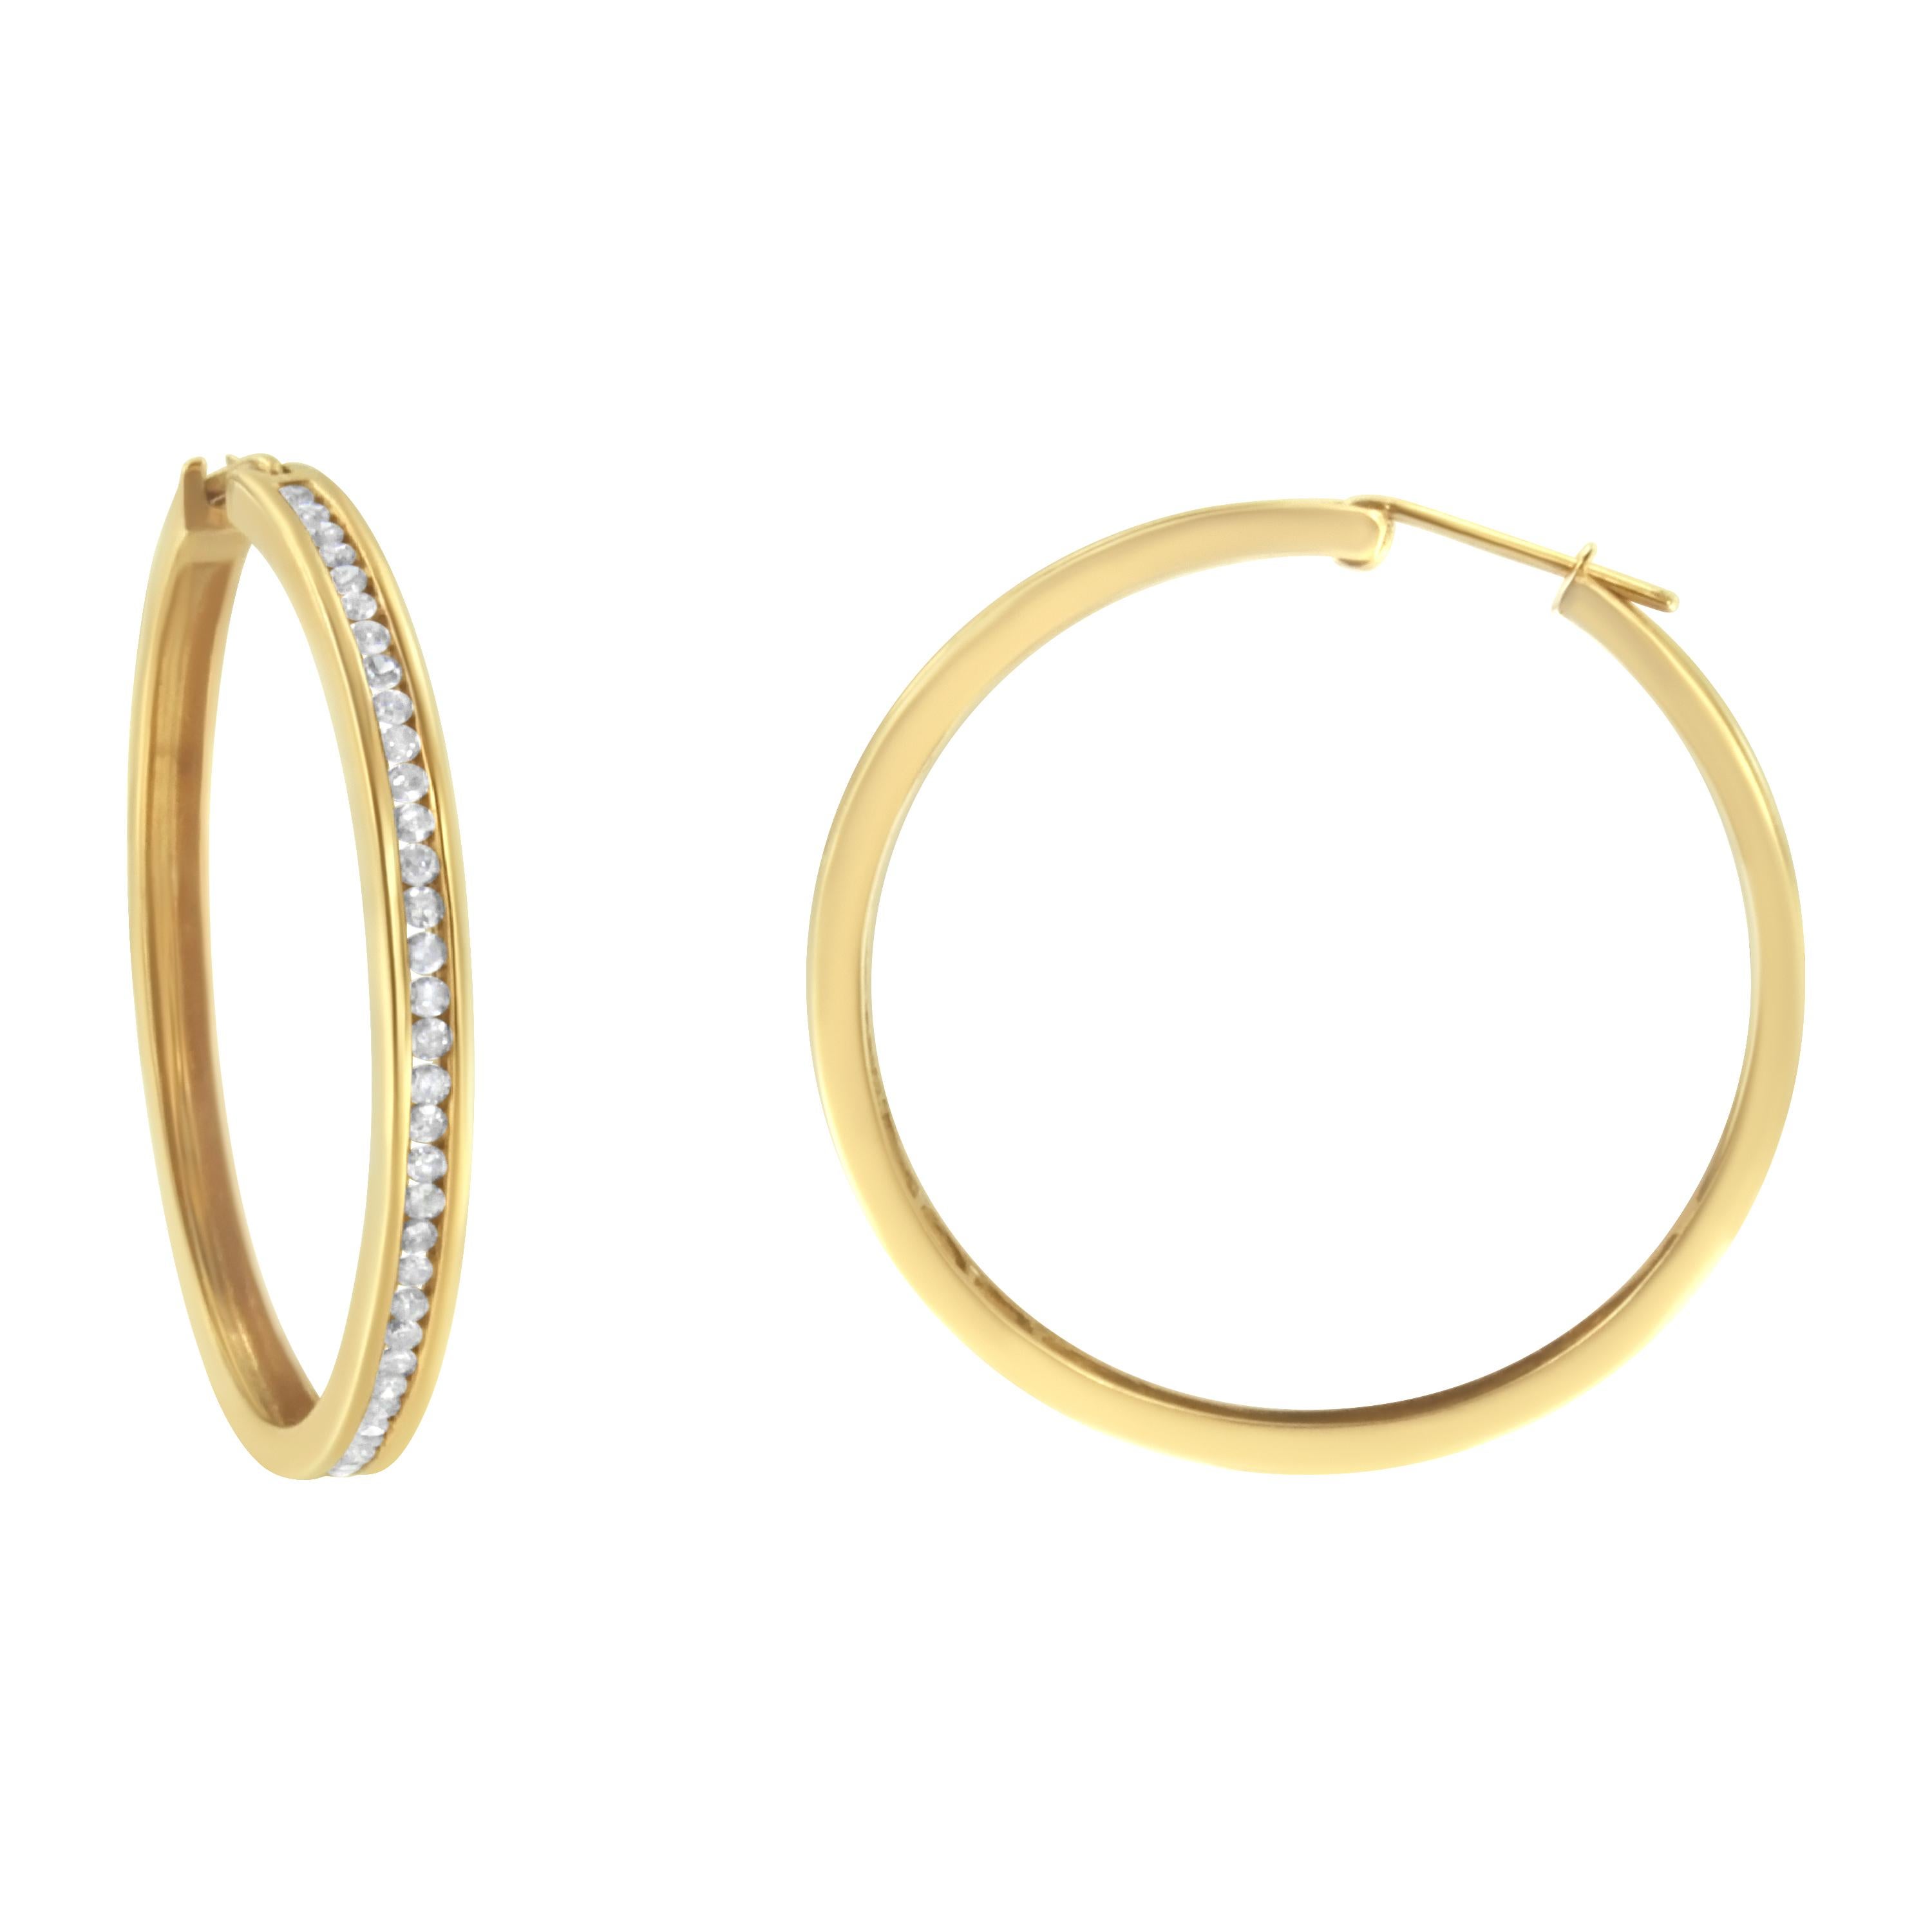 You can't go wrong with these classic 1ct TDW diamond hoop earrings. Sixty six channel set, round cut diamonds sparkle against the warm tone of this 14k yellow gold design. A clip on mechanism keeps the earrings secure. These natural diamonds are